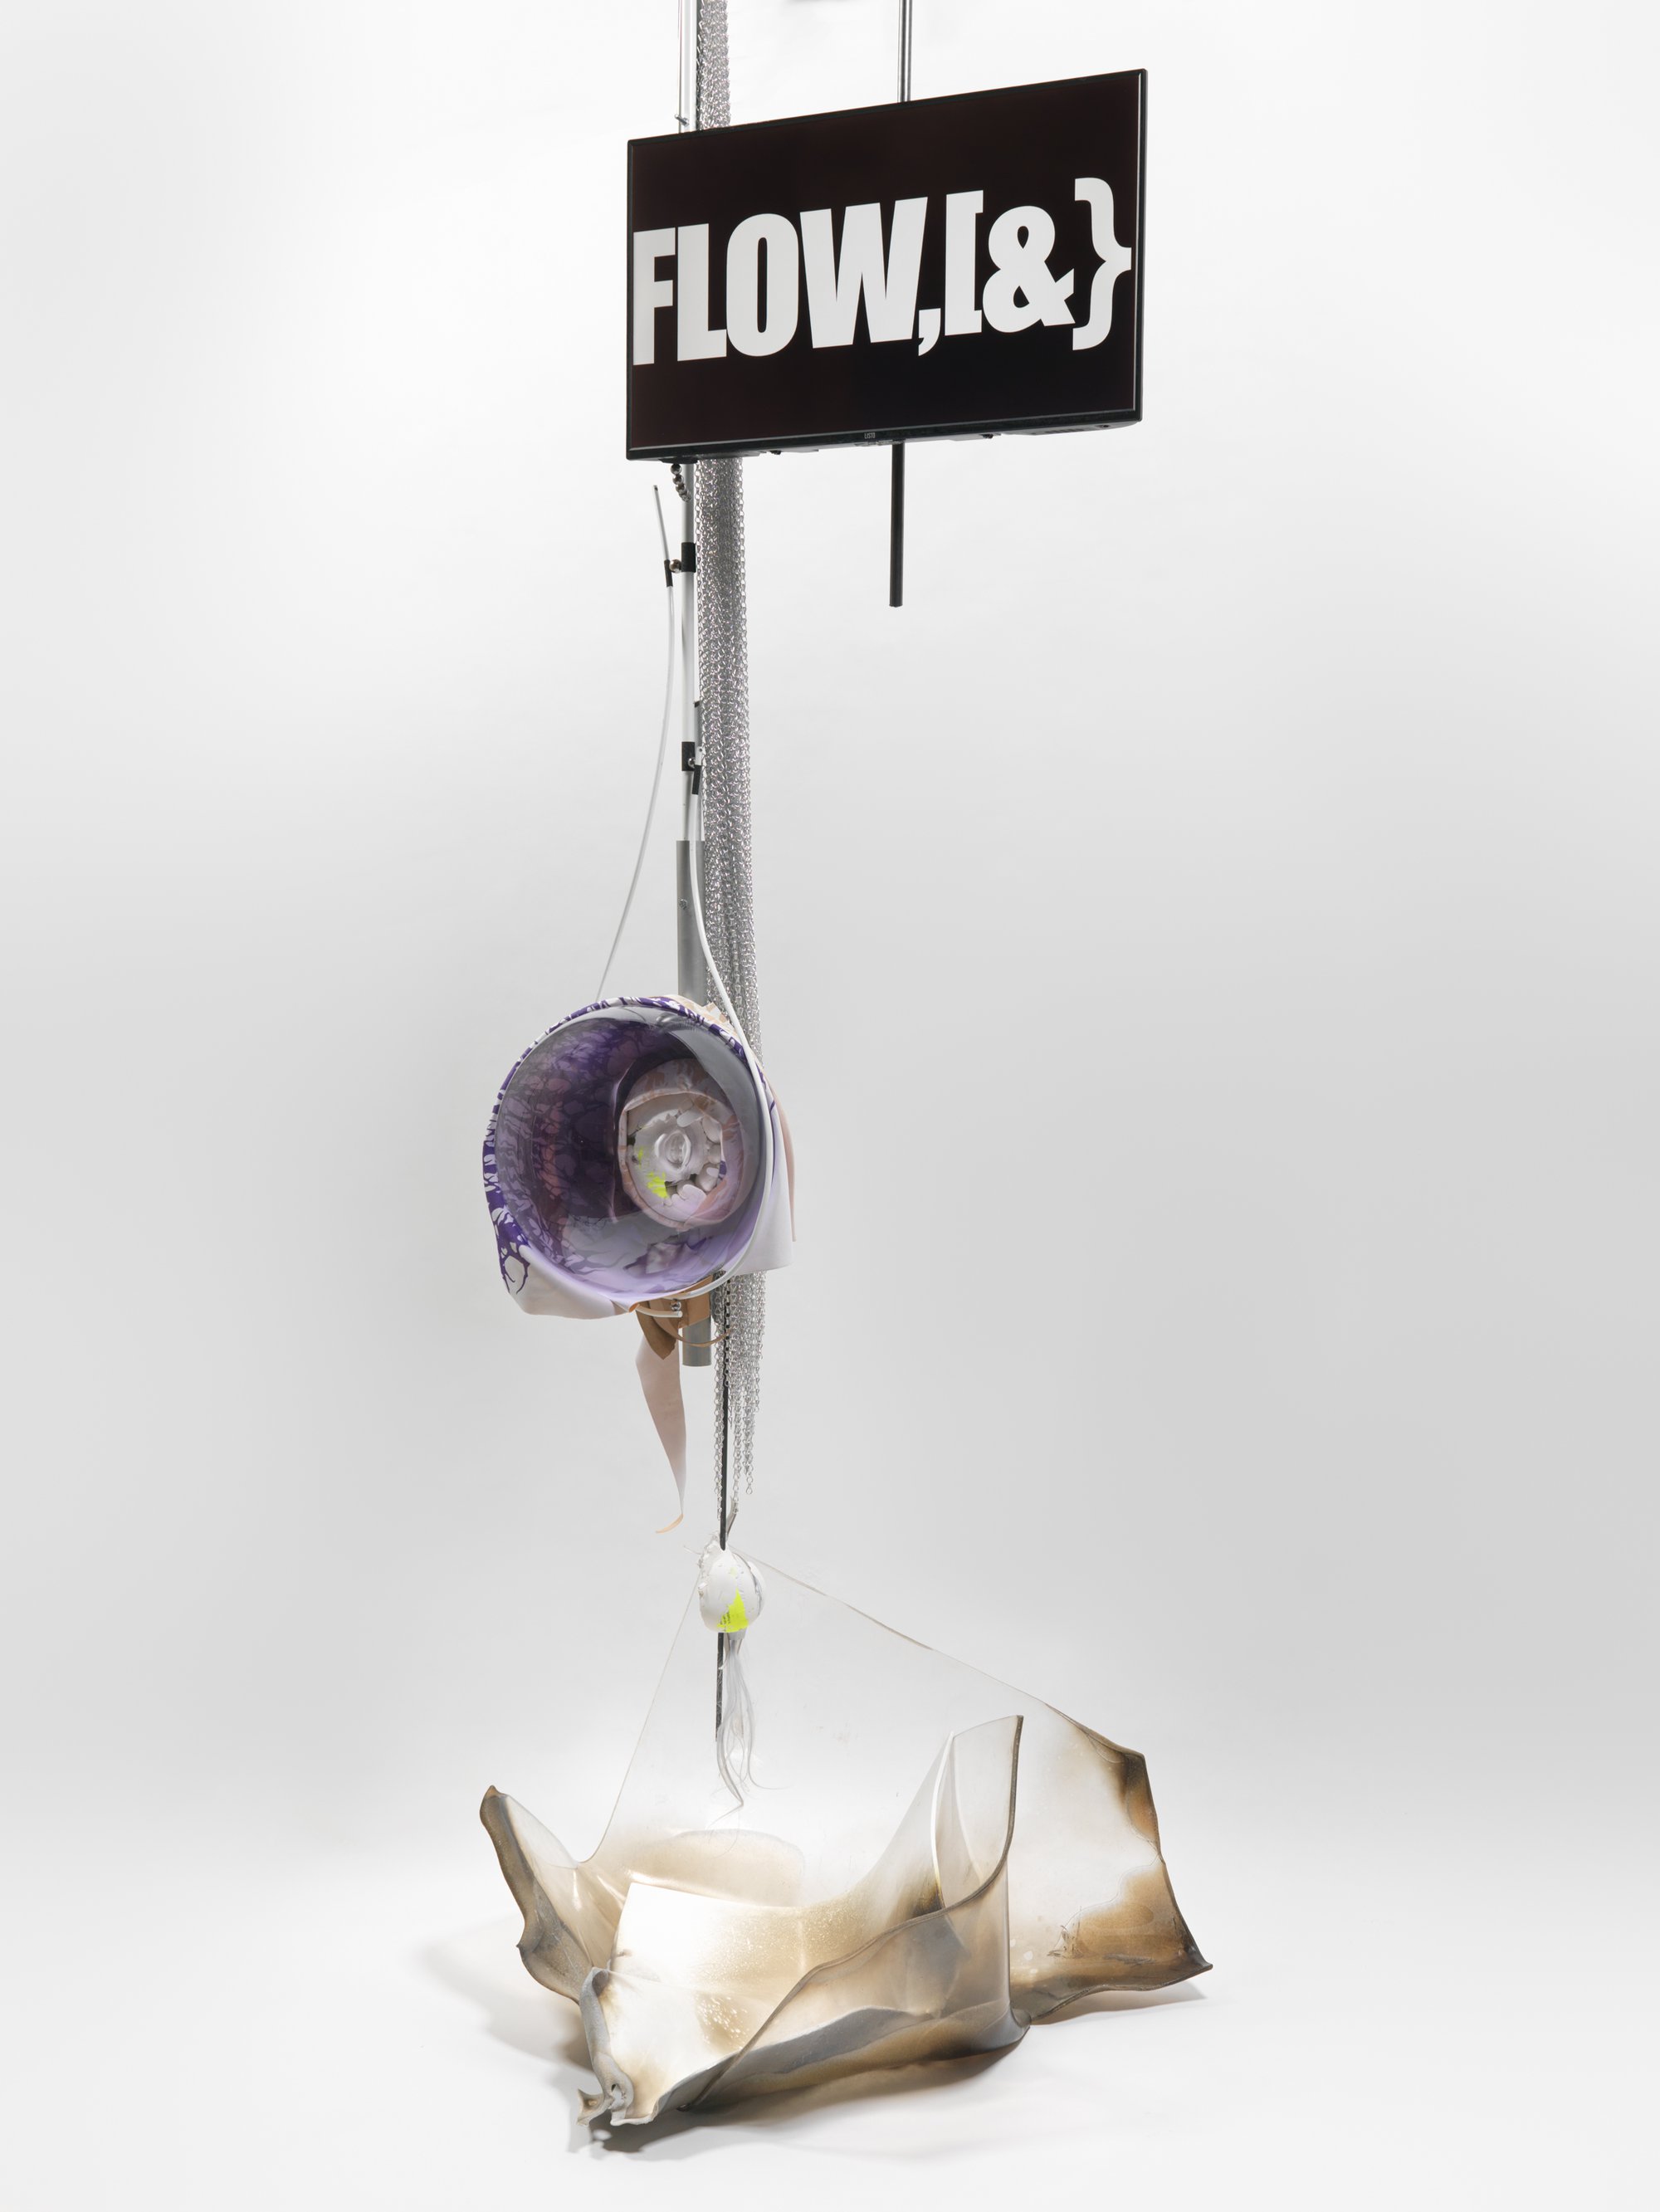 David Douard, 0’Thee LIL (PUMP) 1, blown glass, plaster, metal, aluminium, leather, fabric, paper, plexiglass, water pump, chains, screen, synthetic hair, magnets, industrial paint, 375 x 130 x 100 cm, 2021